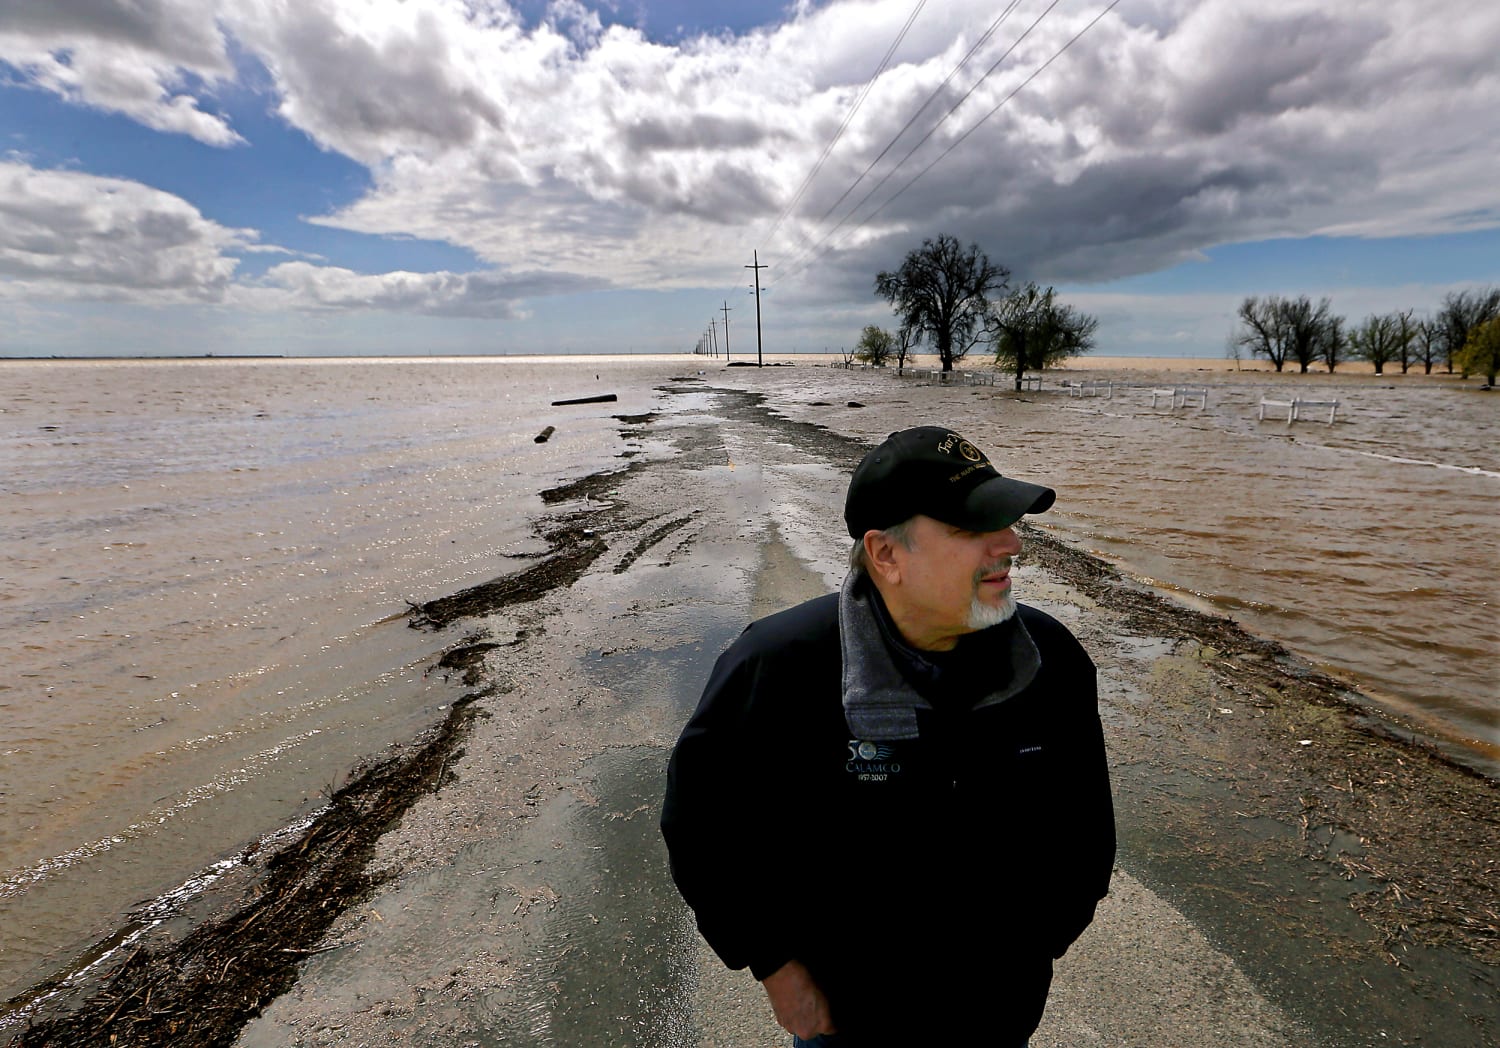 A long-dormant lake has reappeared in California, bringing havoc along with  it